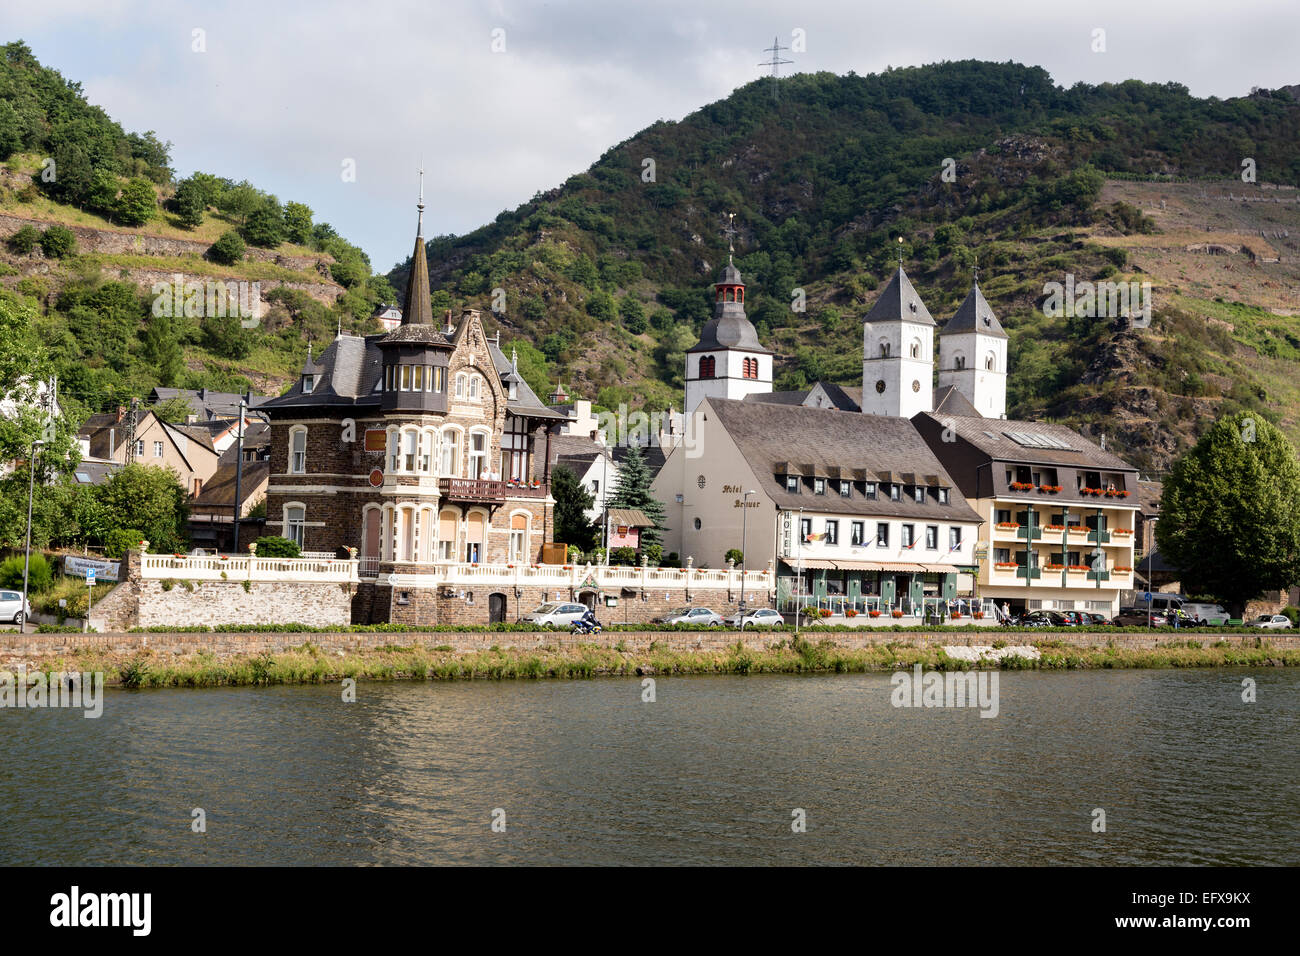 The beautiful and scenic municipality of Treis-Karden along the Moselle River, Germany is a state-recognized tourism resort. Stock Photo